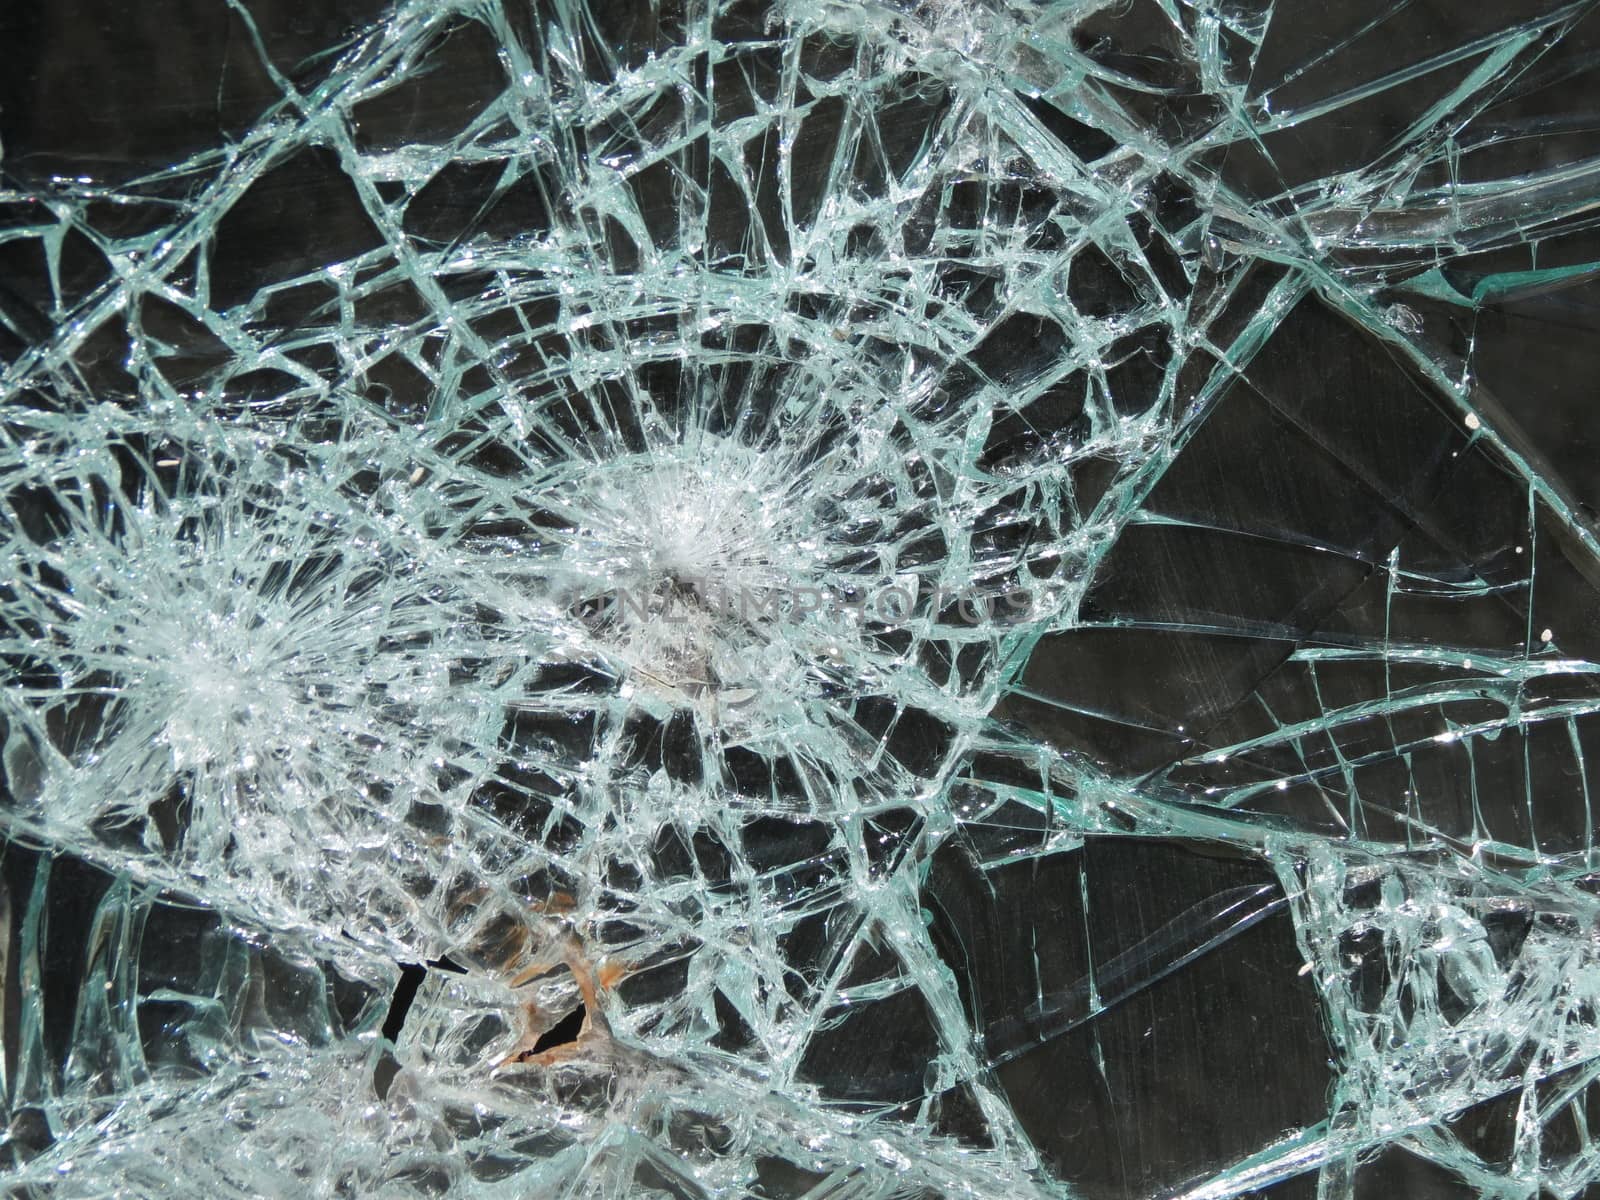 Smashed window glass by paolo77